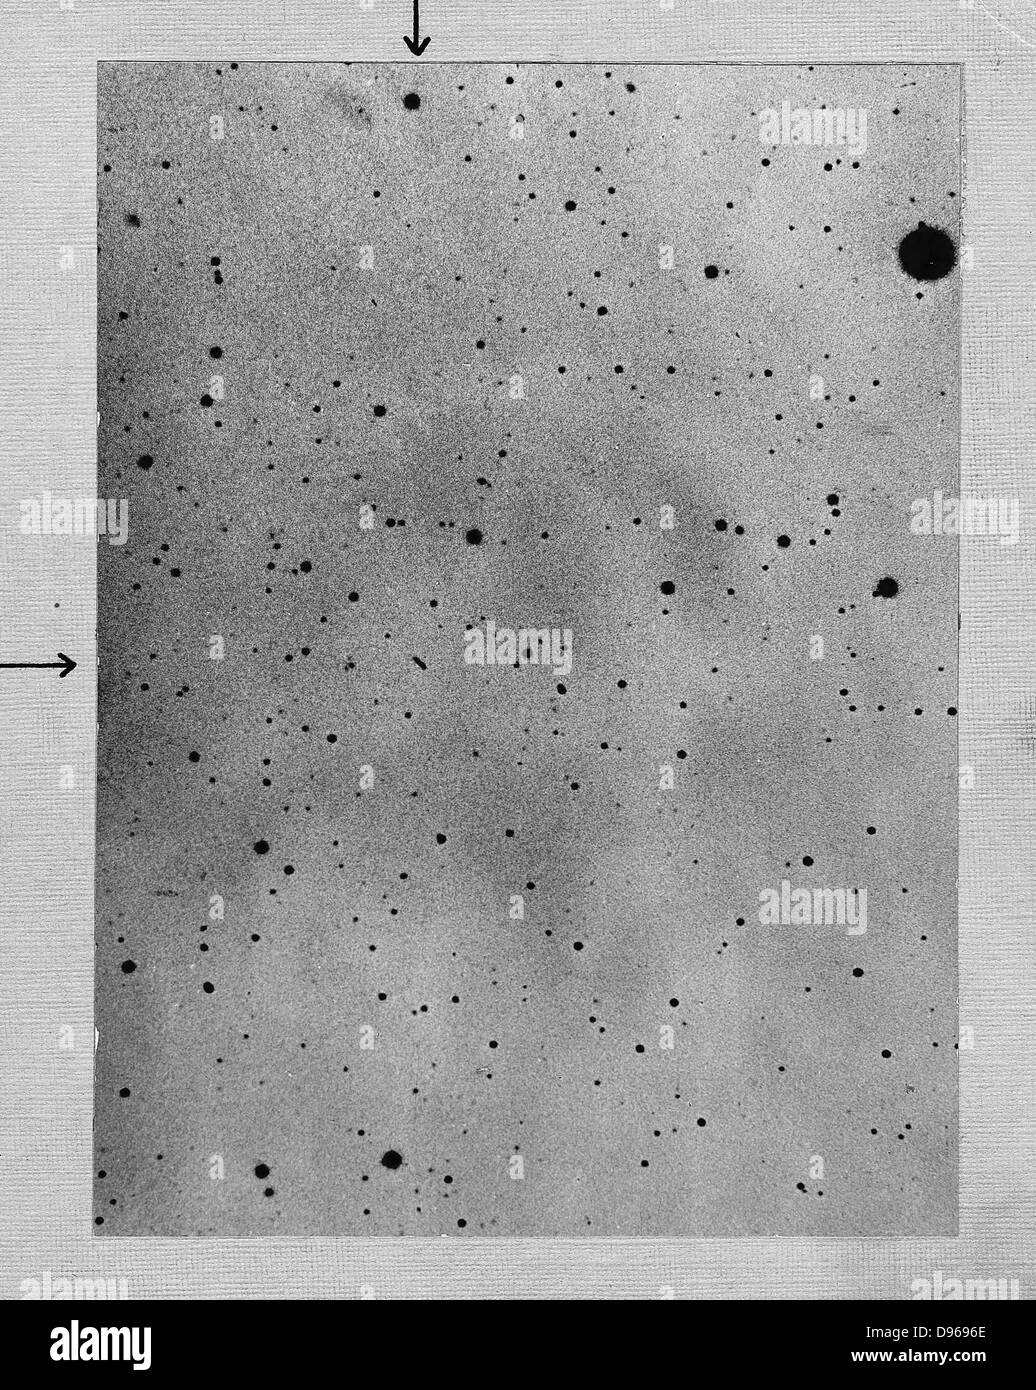 Long exposure of star field showing track of the asteroid (planetoid) Sappho against points of stars. Photograph by Max Wolf of Heidelberg 21 March 1892. Negative not converted to positive to avoid any loss of detail. Stock Photo